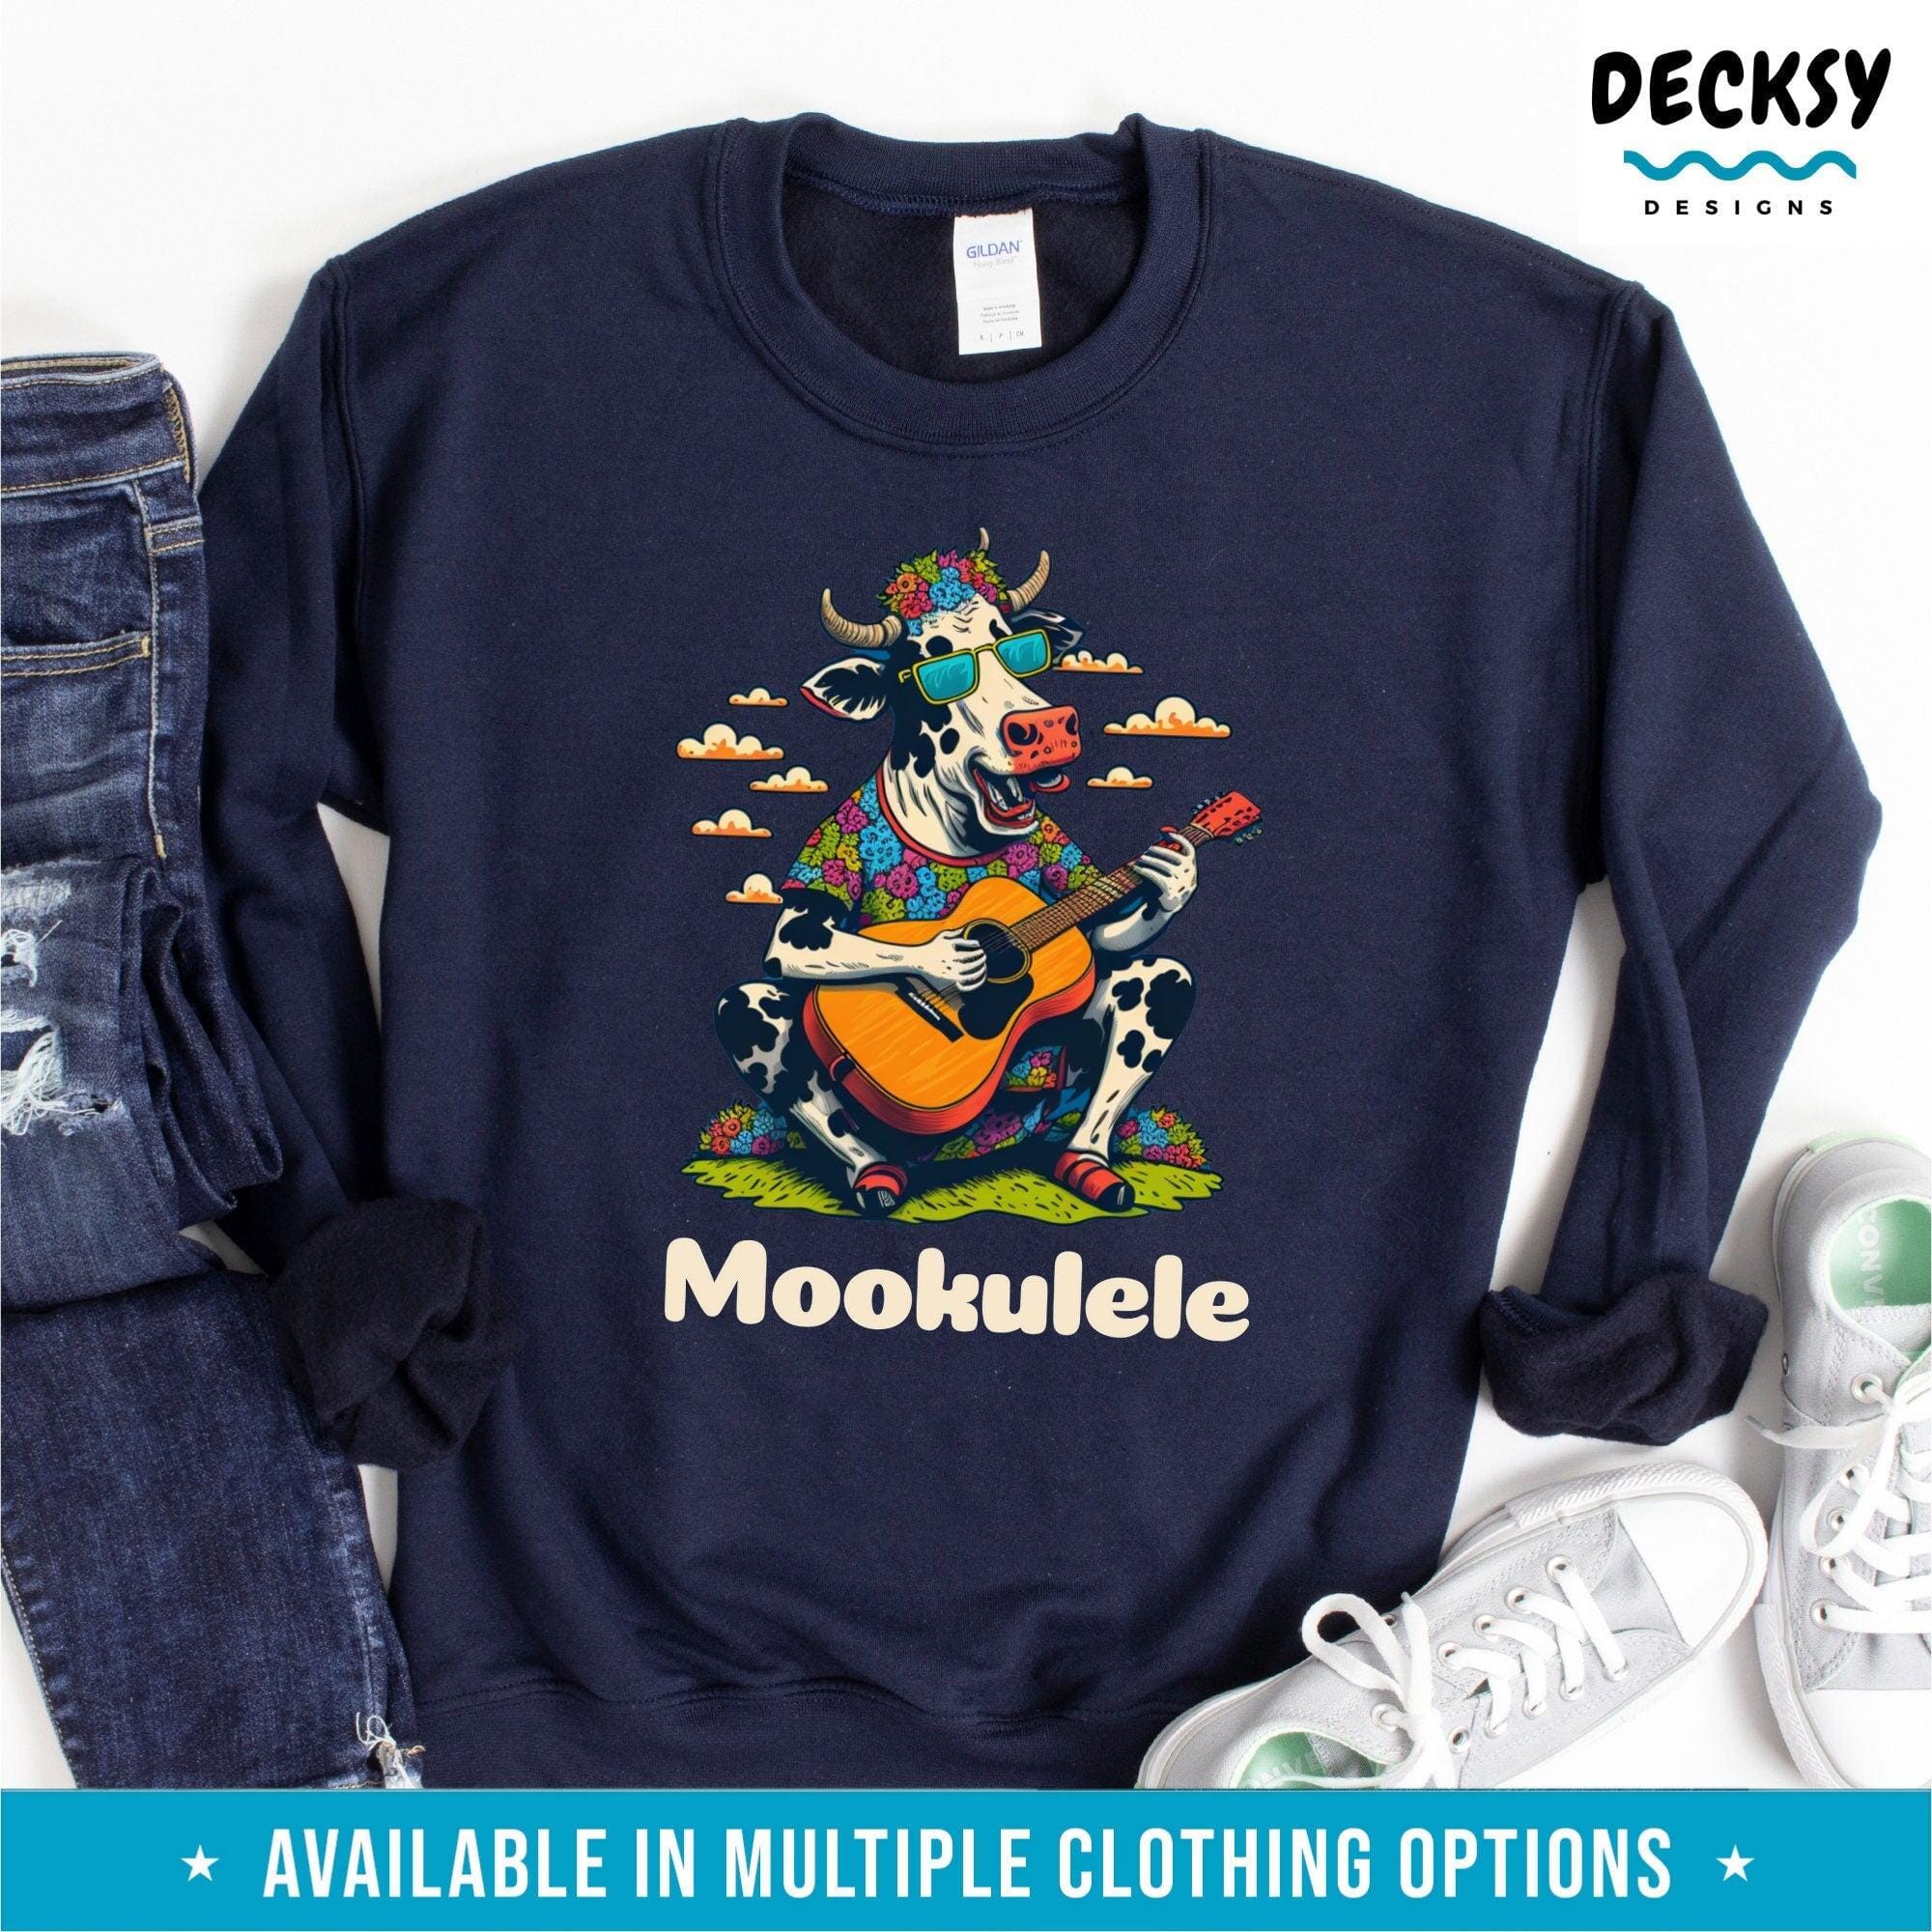 Mookulele Shirt, Funny Music Gift-Clothing:Gender-Neutral Adult Clothing:Tops & Tees:T-shirts:Graphic Tees-DecksyDesigns